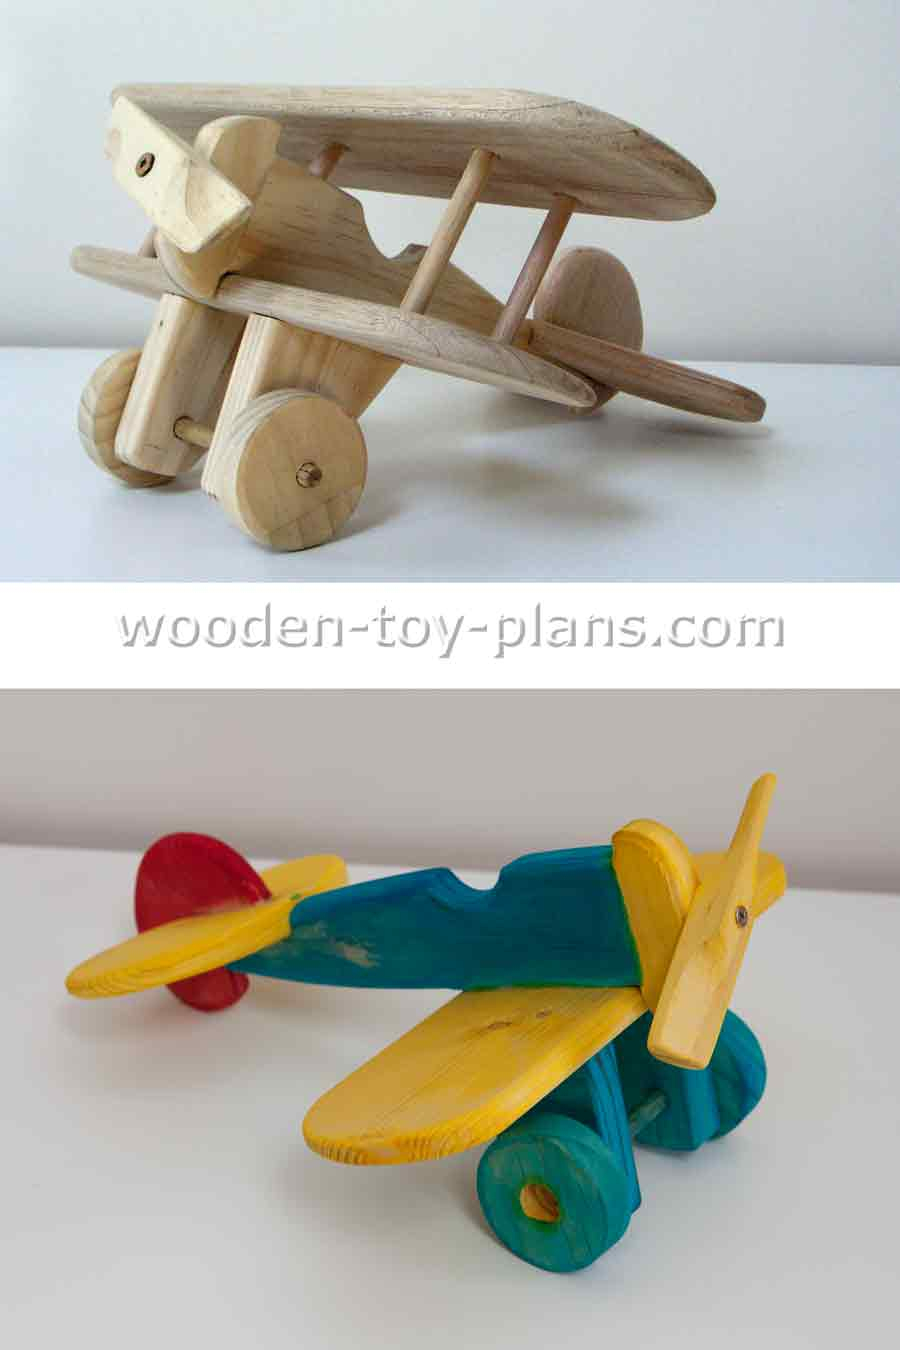 Free Wooden Toy Plans. For The Joy Of Making Toys, Print Ready Pdf - Free Wooden Toy Plans Printable